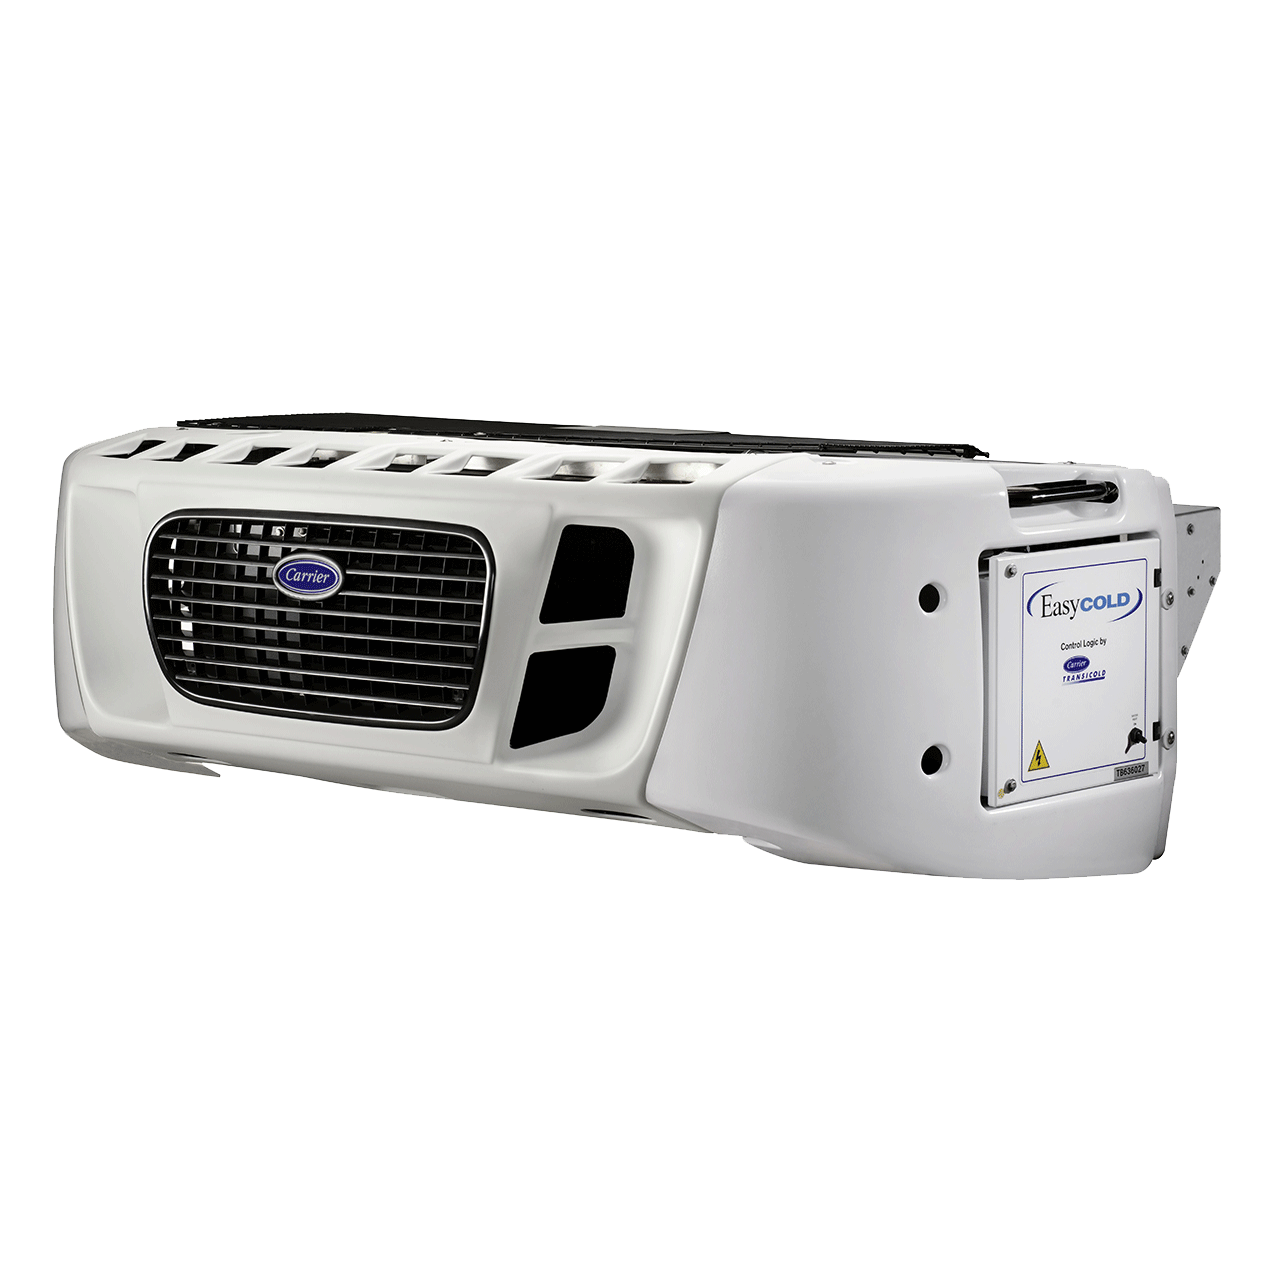 Carrier Oasis Easy Cold Unit